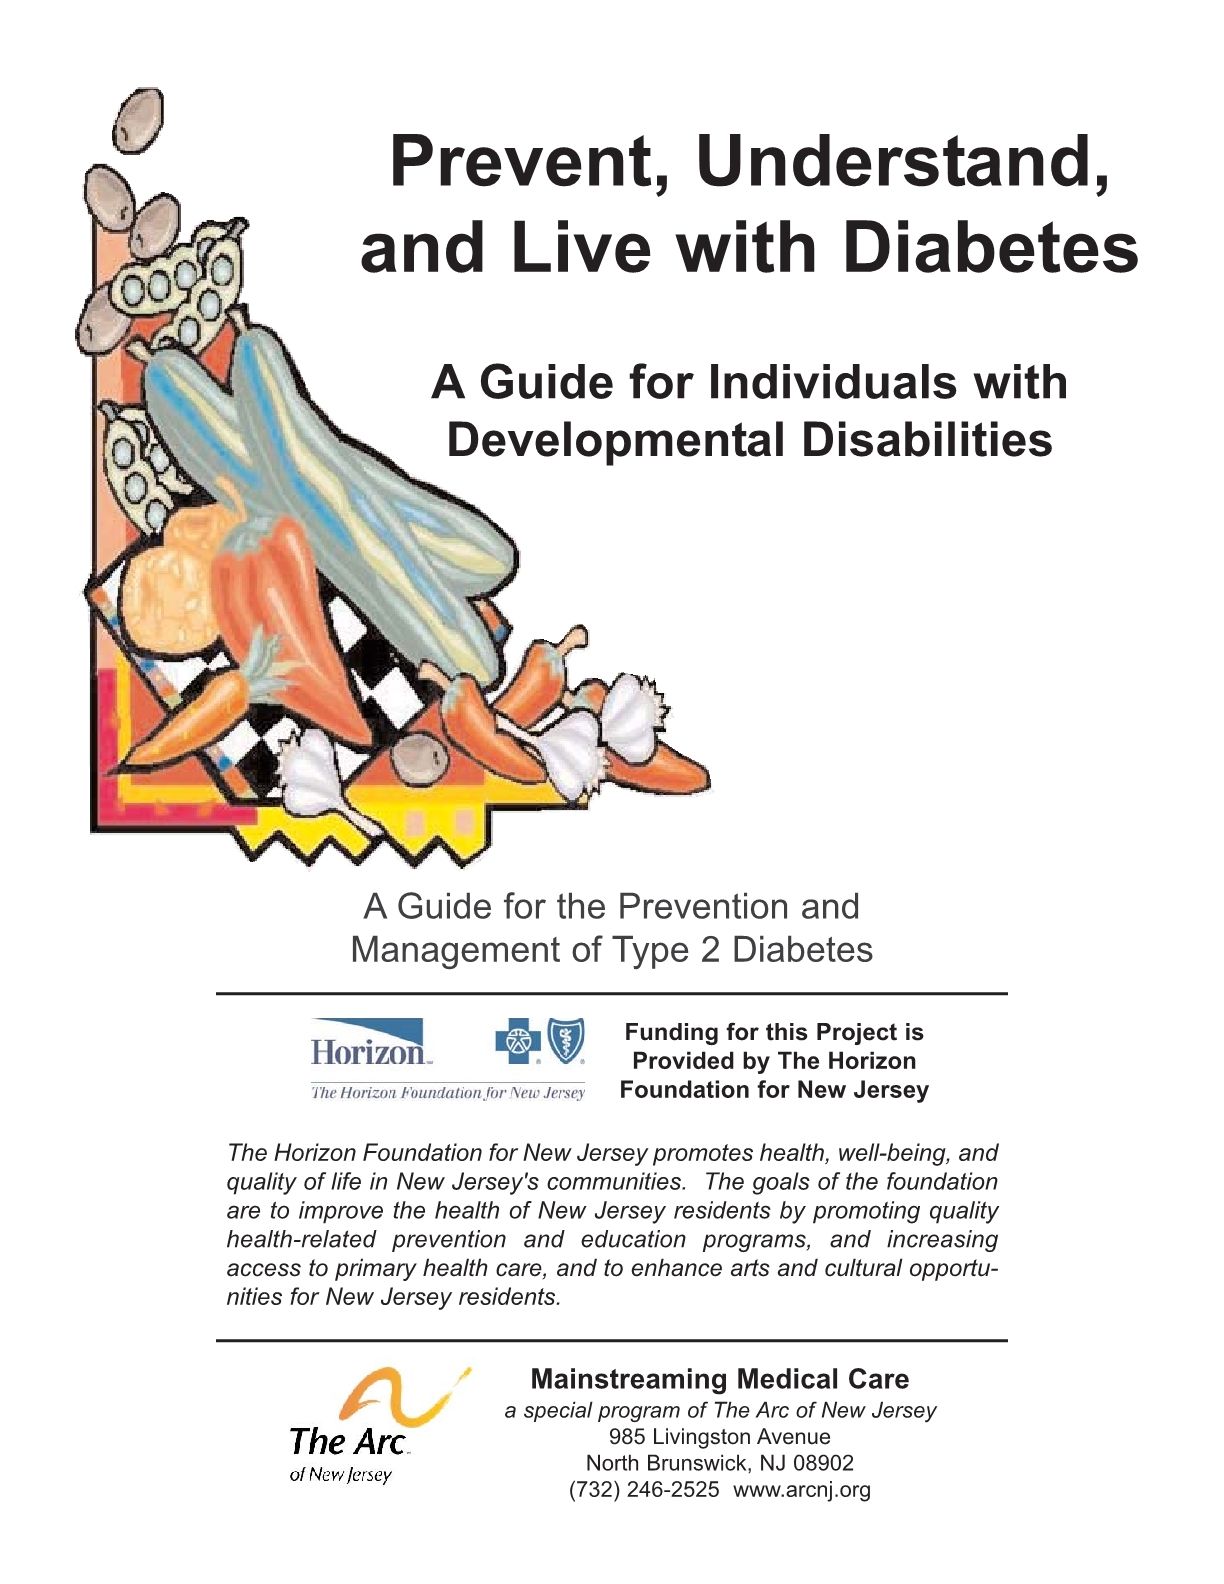 Prevent, Understand, and Live with Diabetes_A Guide for Individuals with Developmental Disabilities - English